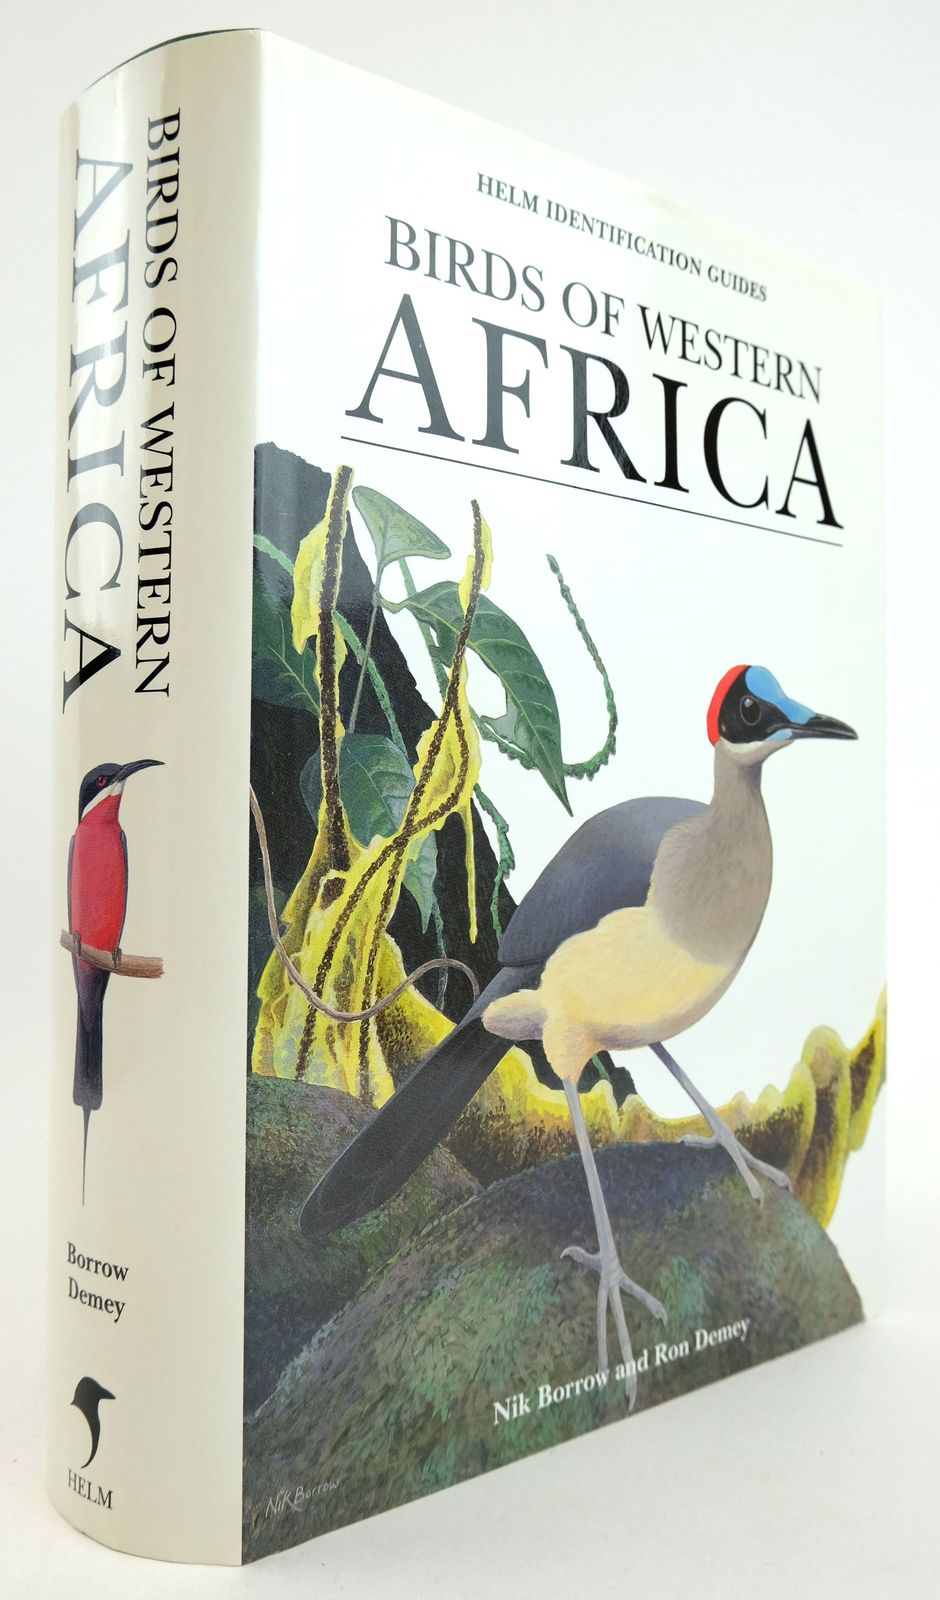 Photo of BIRDS OF WESTERN AFRICA (HELM IDENTIFICATION GUIDES) written by Demey, Ron illustrated by Borrow, Nik published by Christopher Helm (STOCK CODE: 1819322)  for sale by Stella & Rose's Books